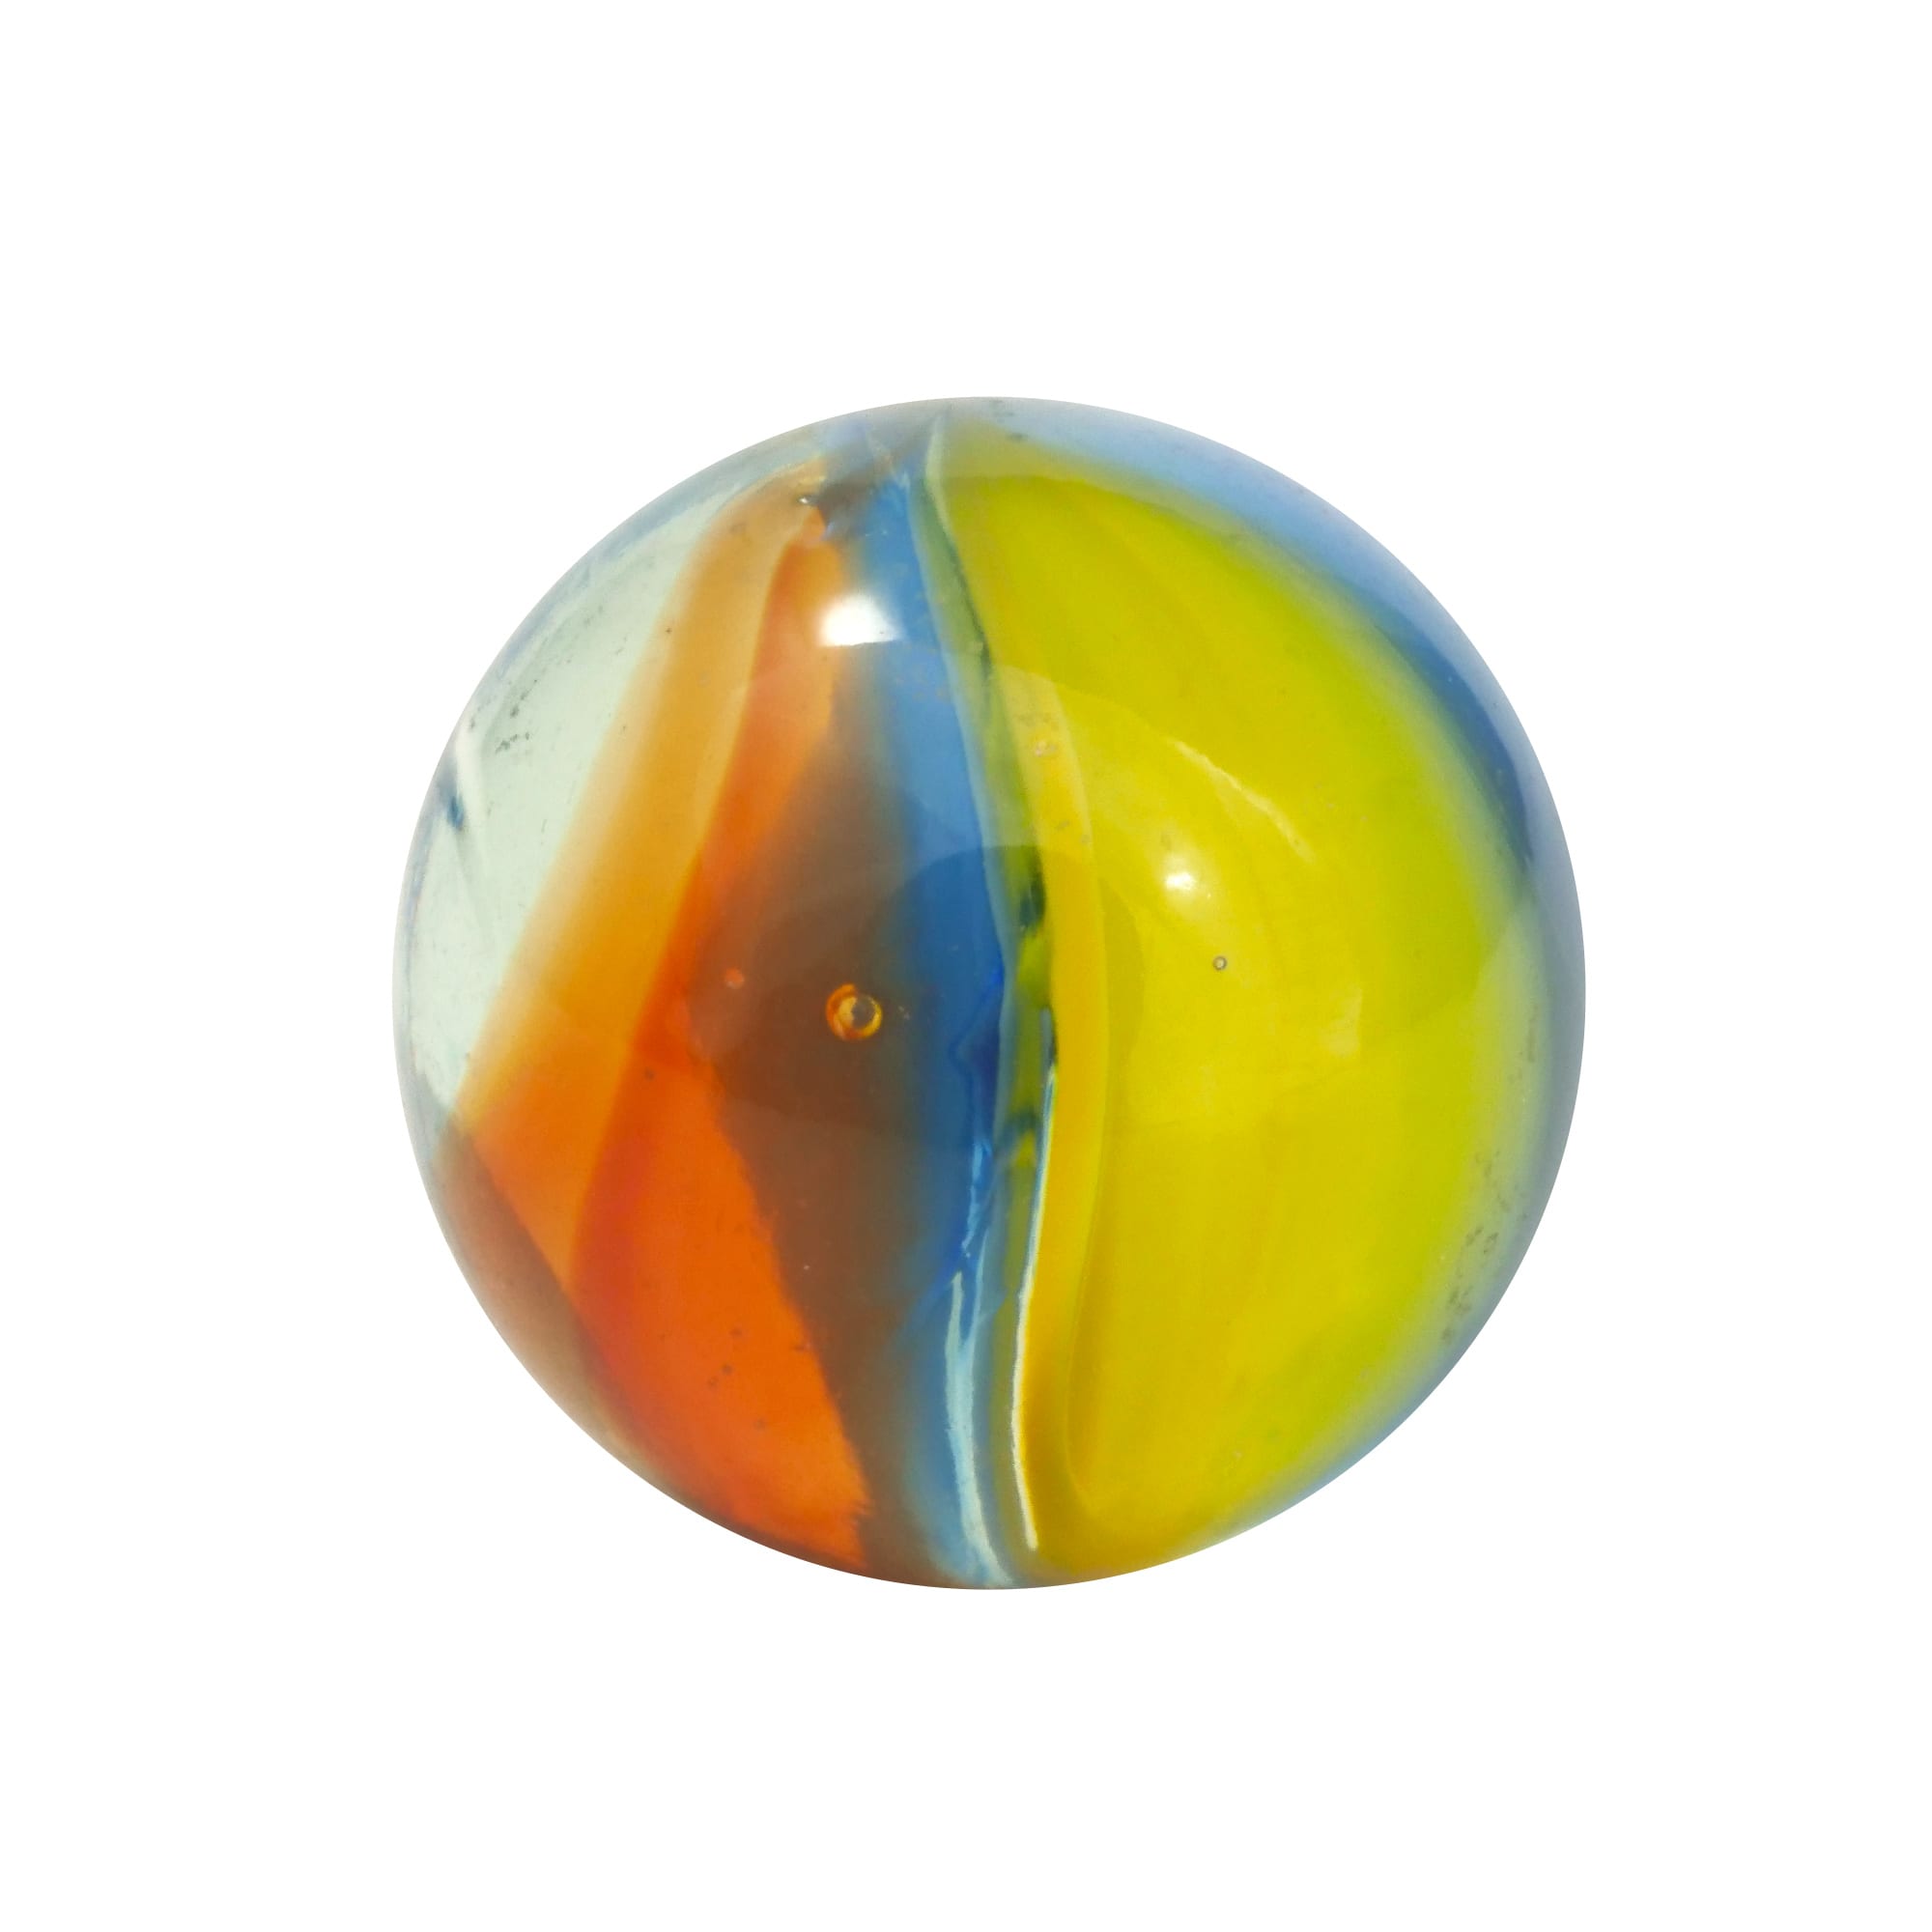 NEW 102 CAT'S EYE GLASS MARBLES IN NET inc 2 DOBBER SHOOTER MARBLE KNIGHT 